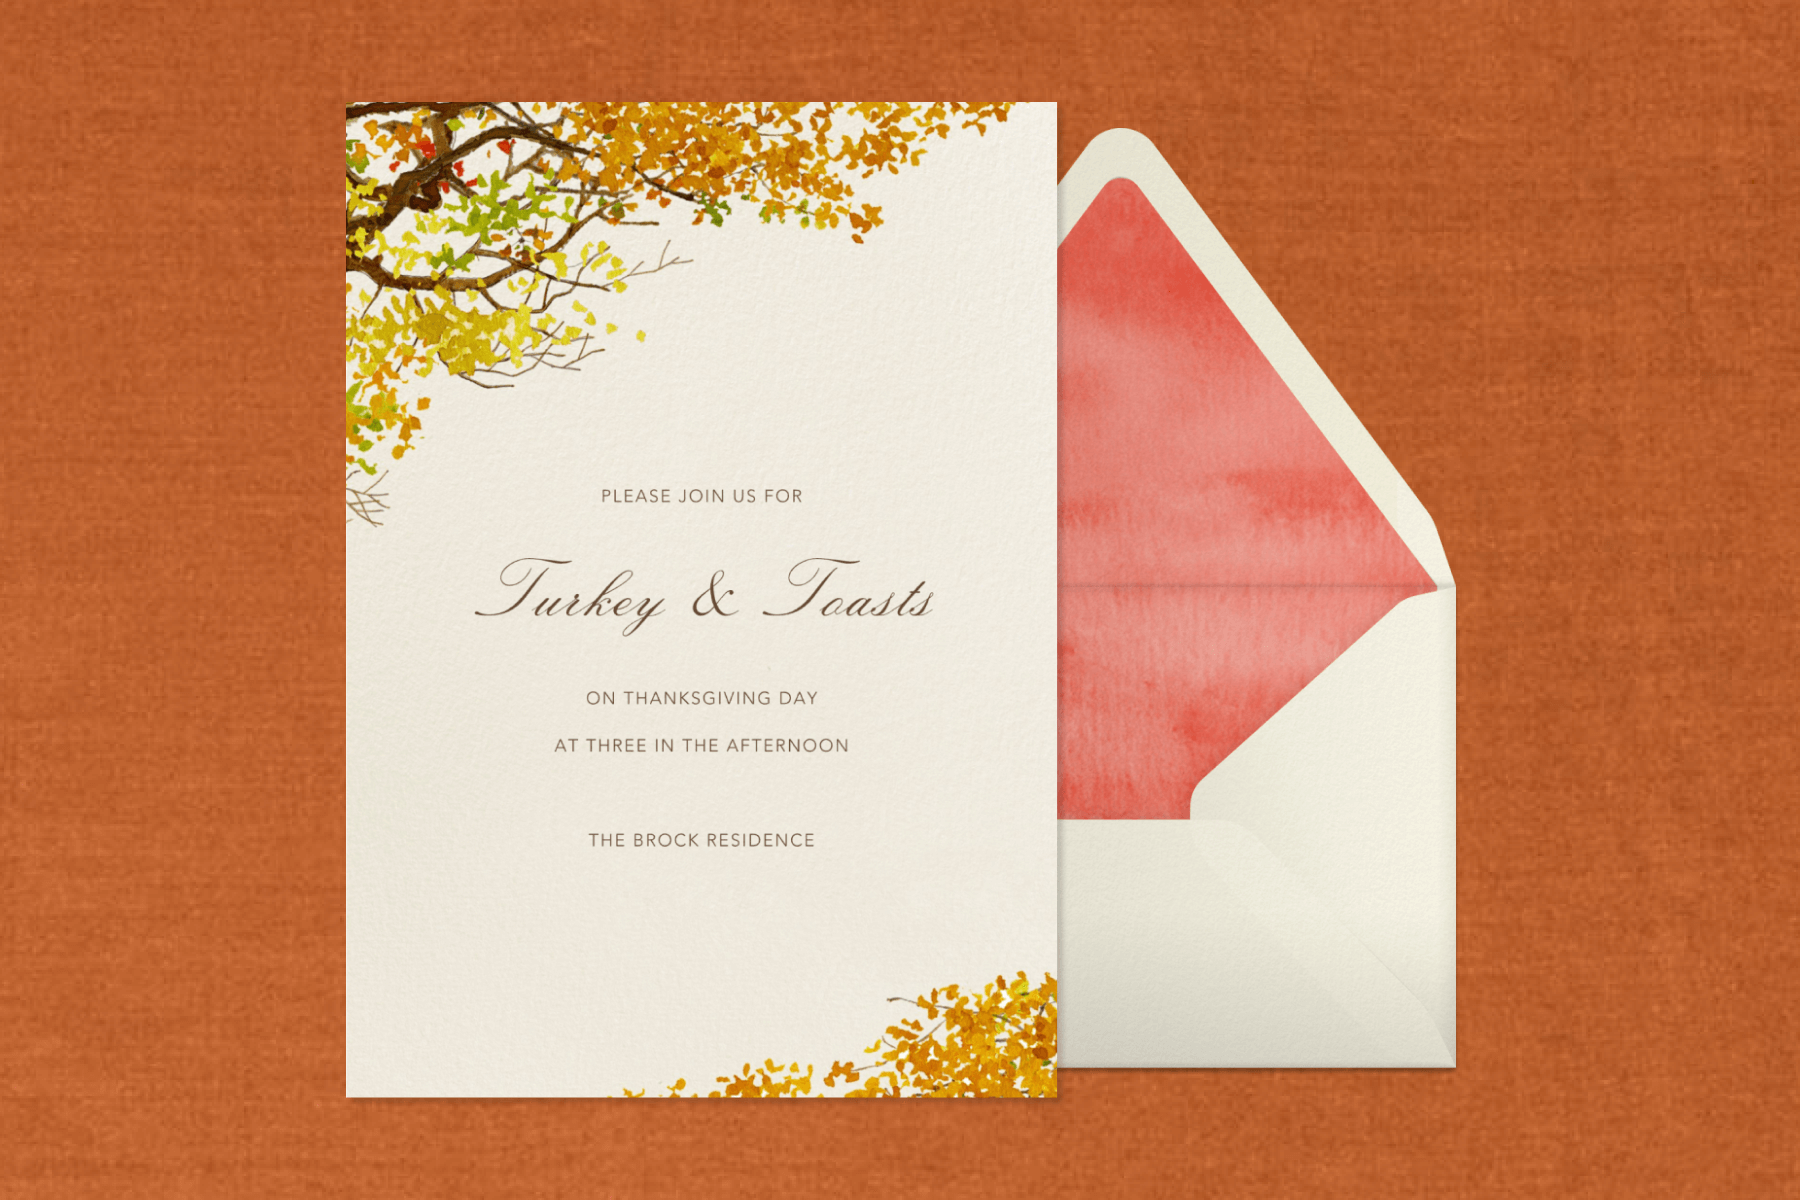 A simple Thanksgiving invitation with branches of an orange fall tree that says, "Please join us for turkey and toasts on Thanksgiving day at three in the afternoon."